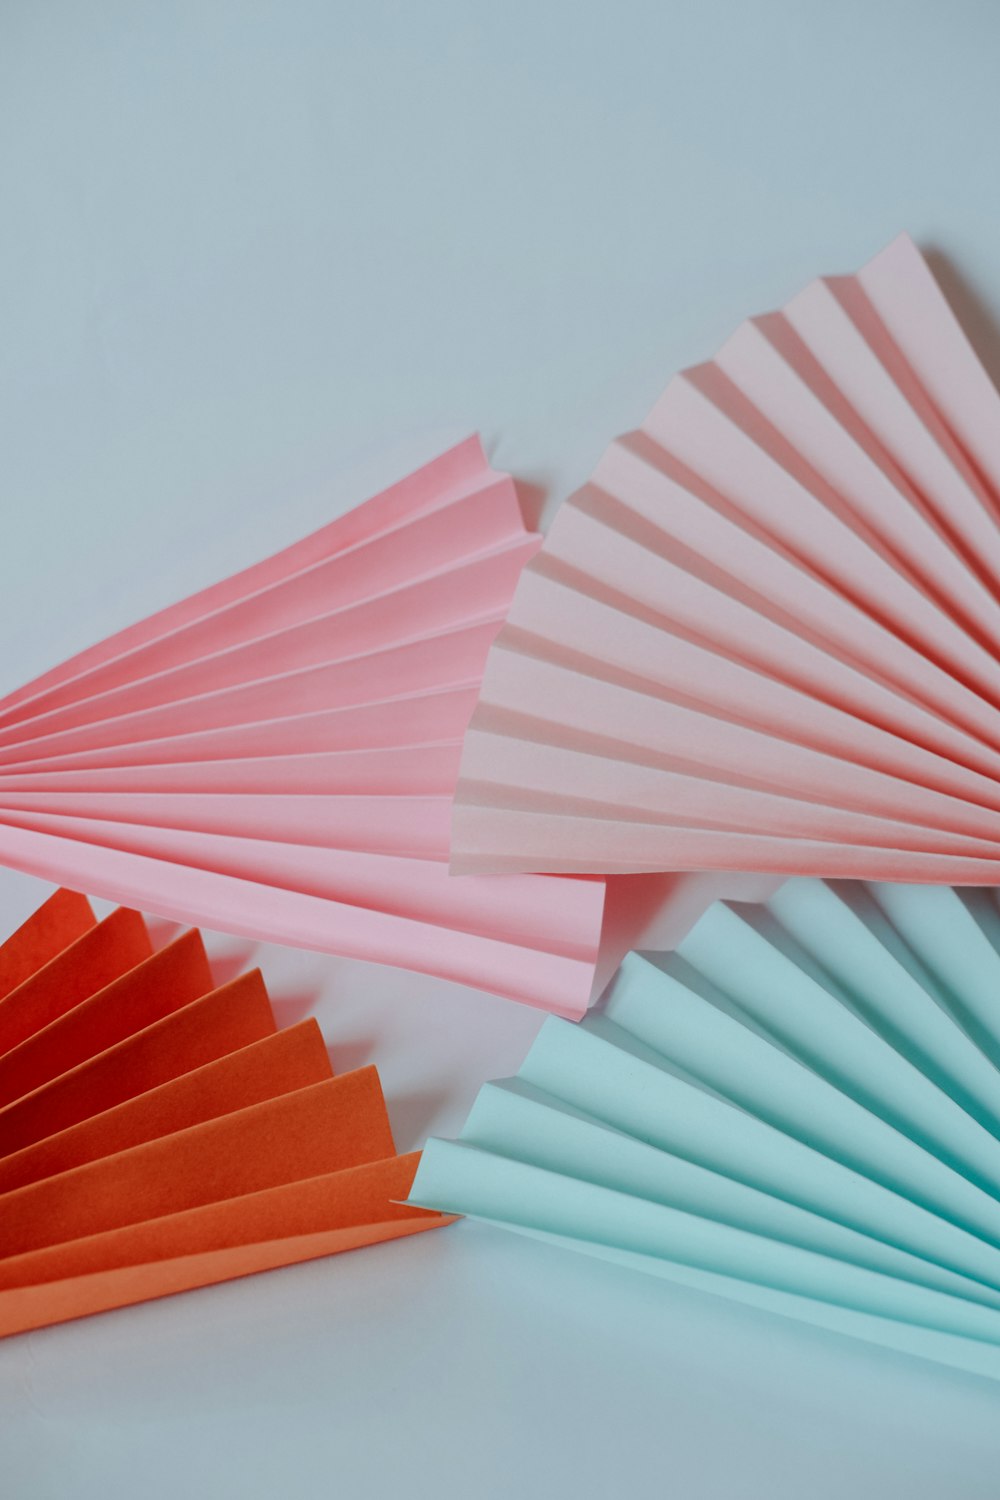 a close up of a paper fan on a table